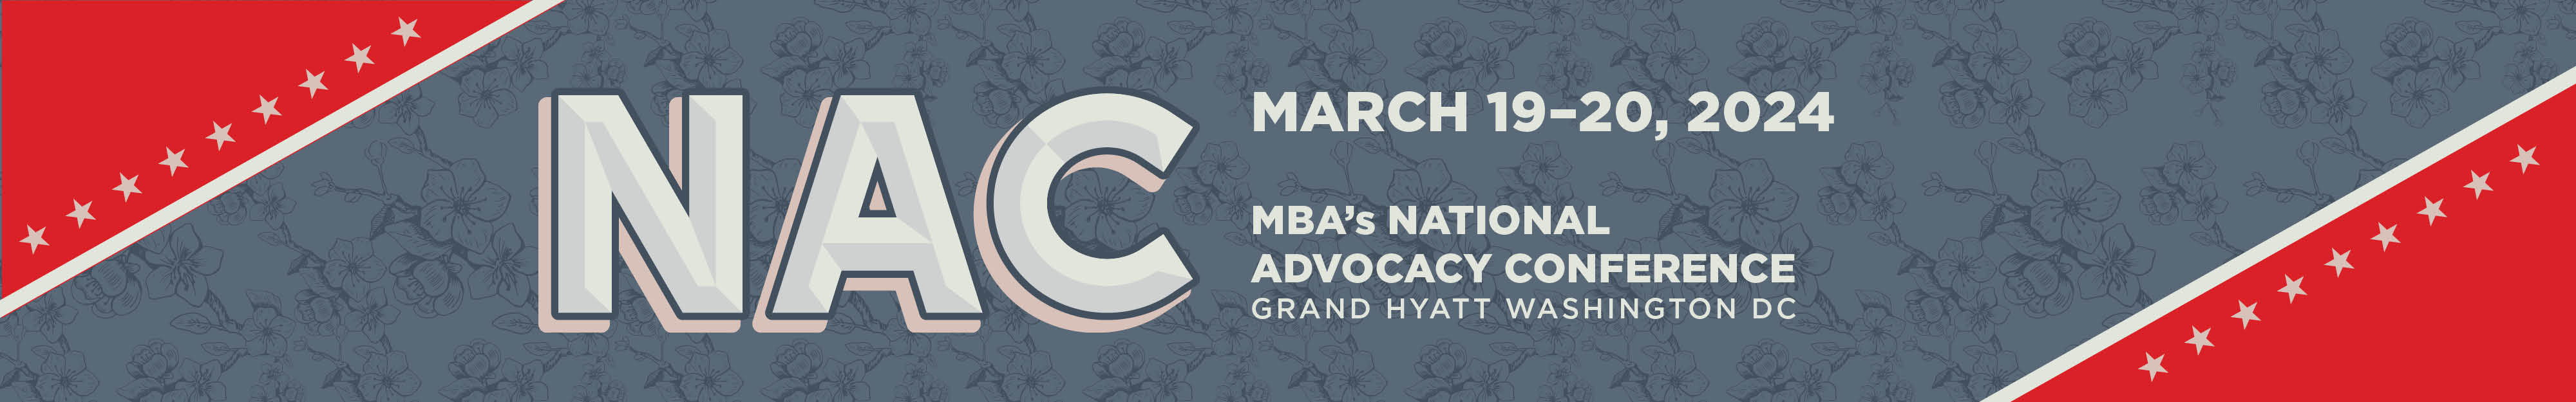 National Advocacy Conference 2024 header banner